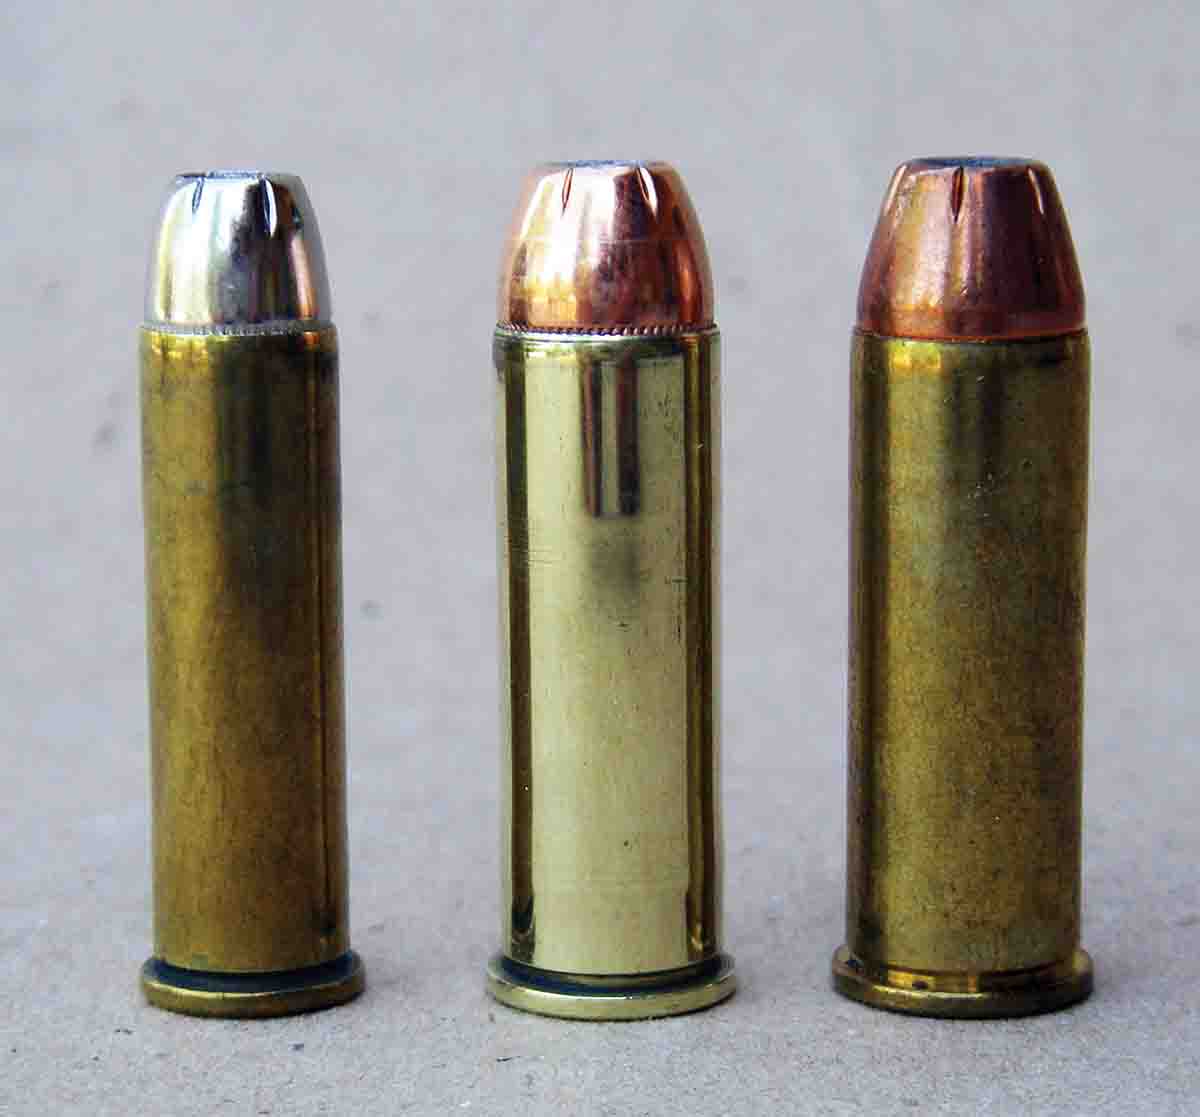 The .41 Magnum (center) offers performance sandwiched between the .357 Magn...